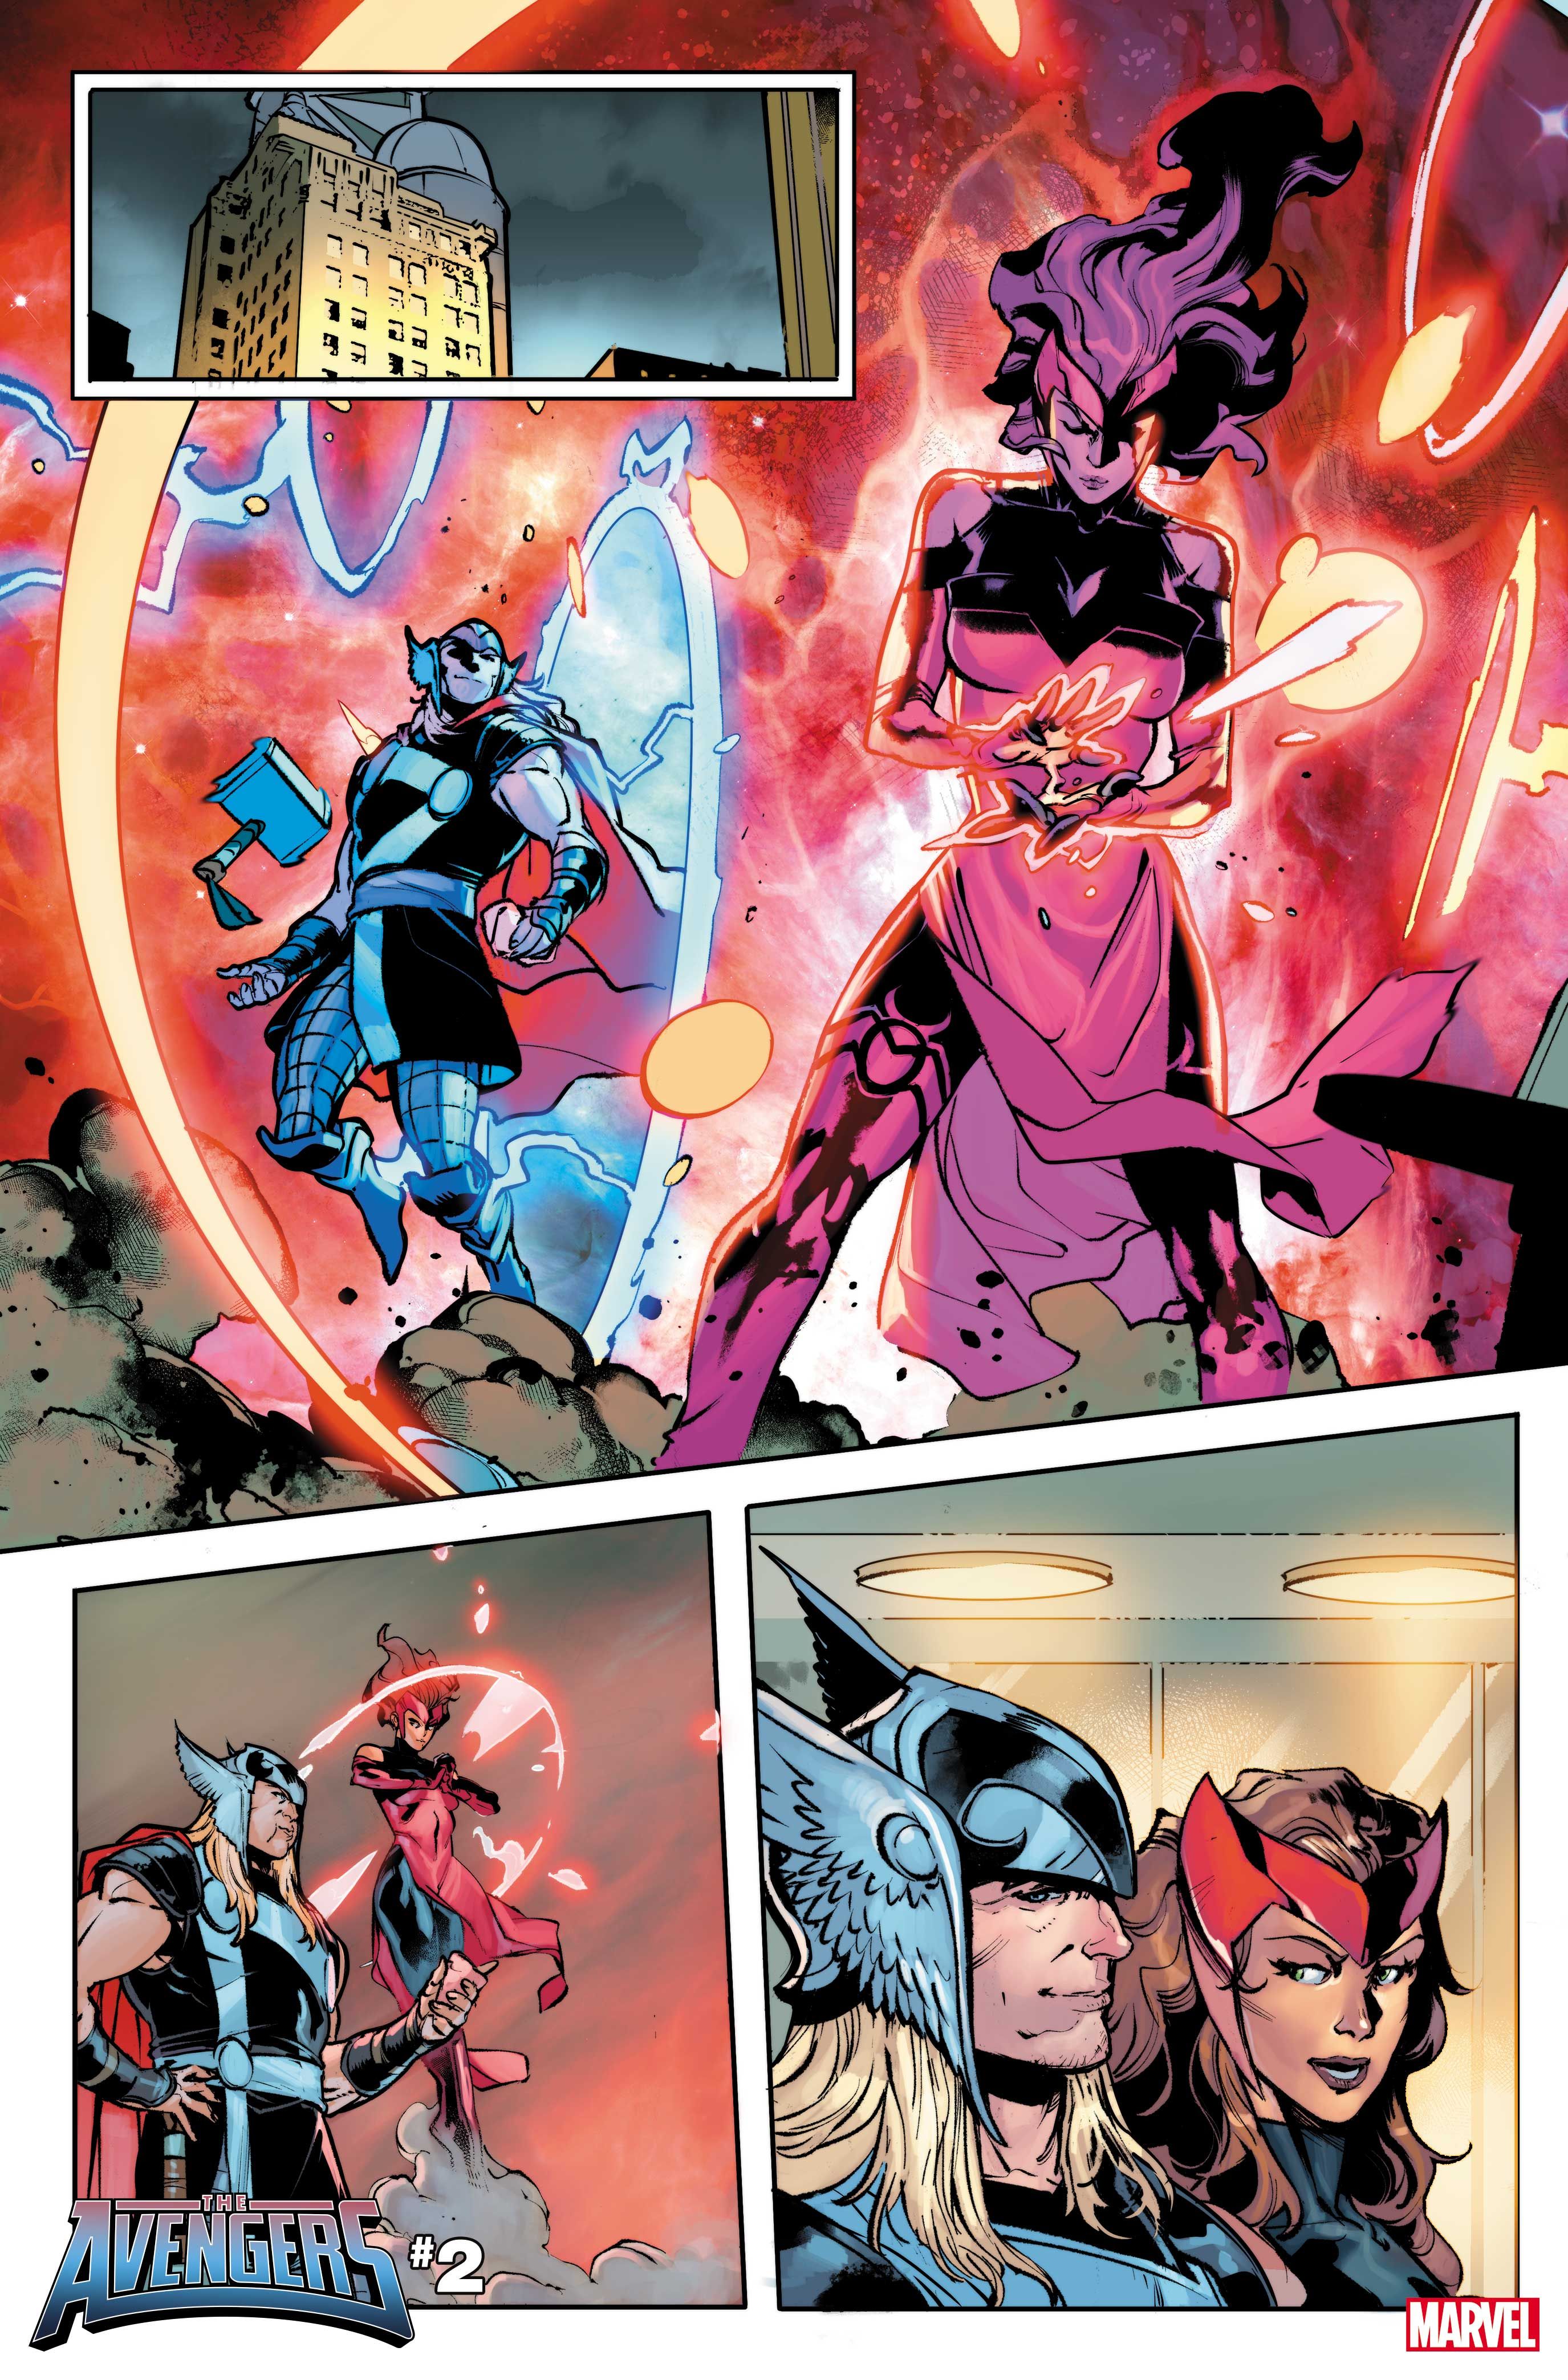 Scarlet Witch and Thor meet in Avengers #2